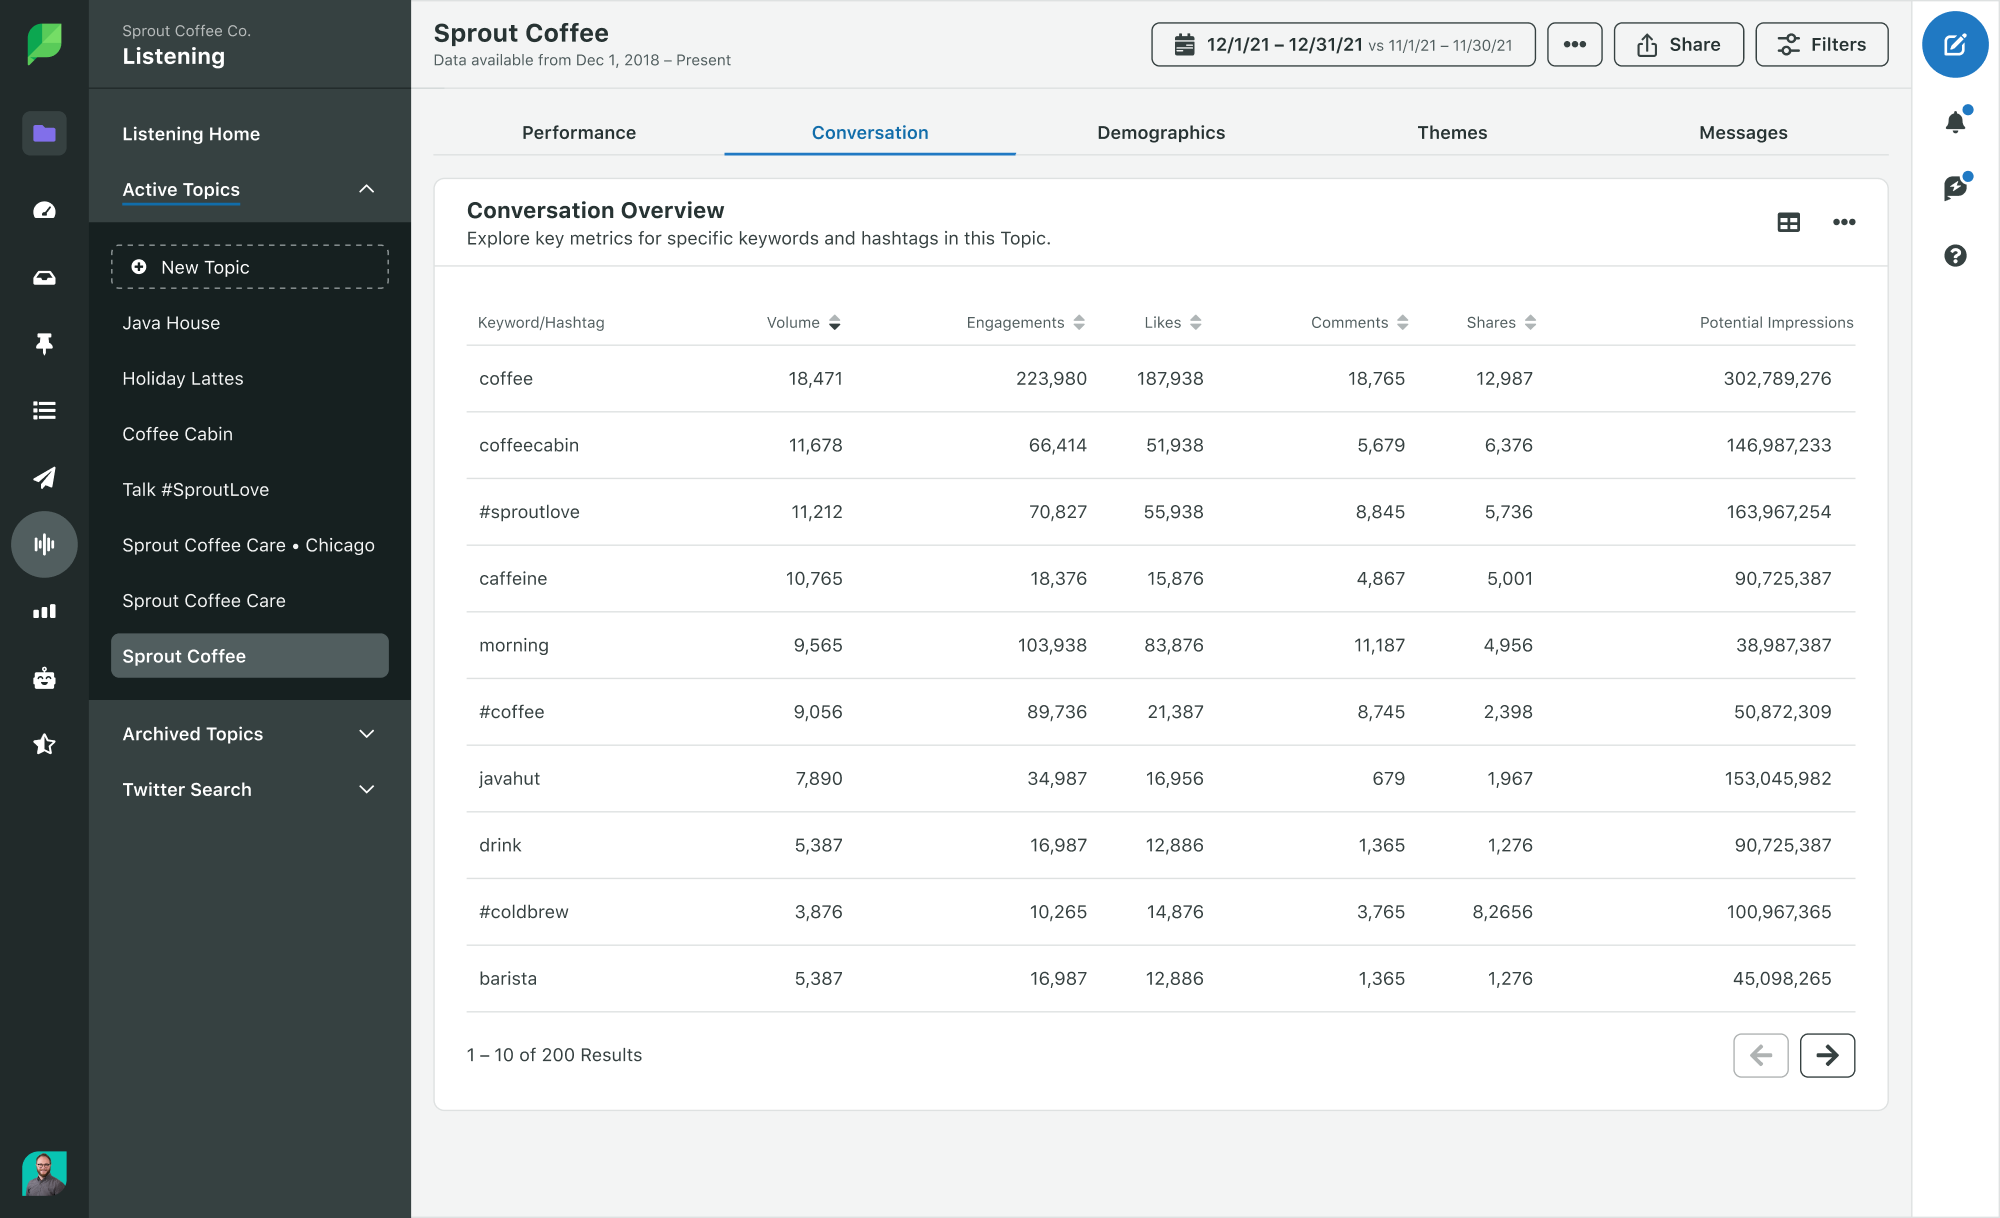 A screenshot of Sprout's Listening Conversation Overview which demonstrates trending keywords and hashtags popular on social.